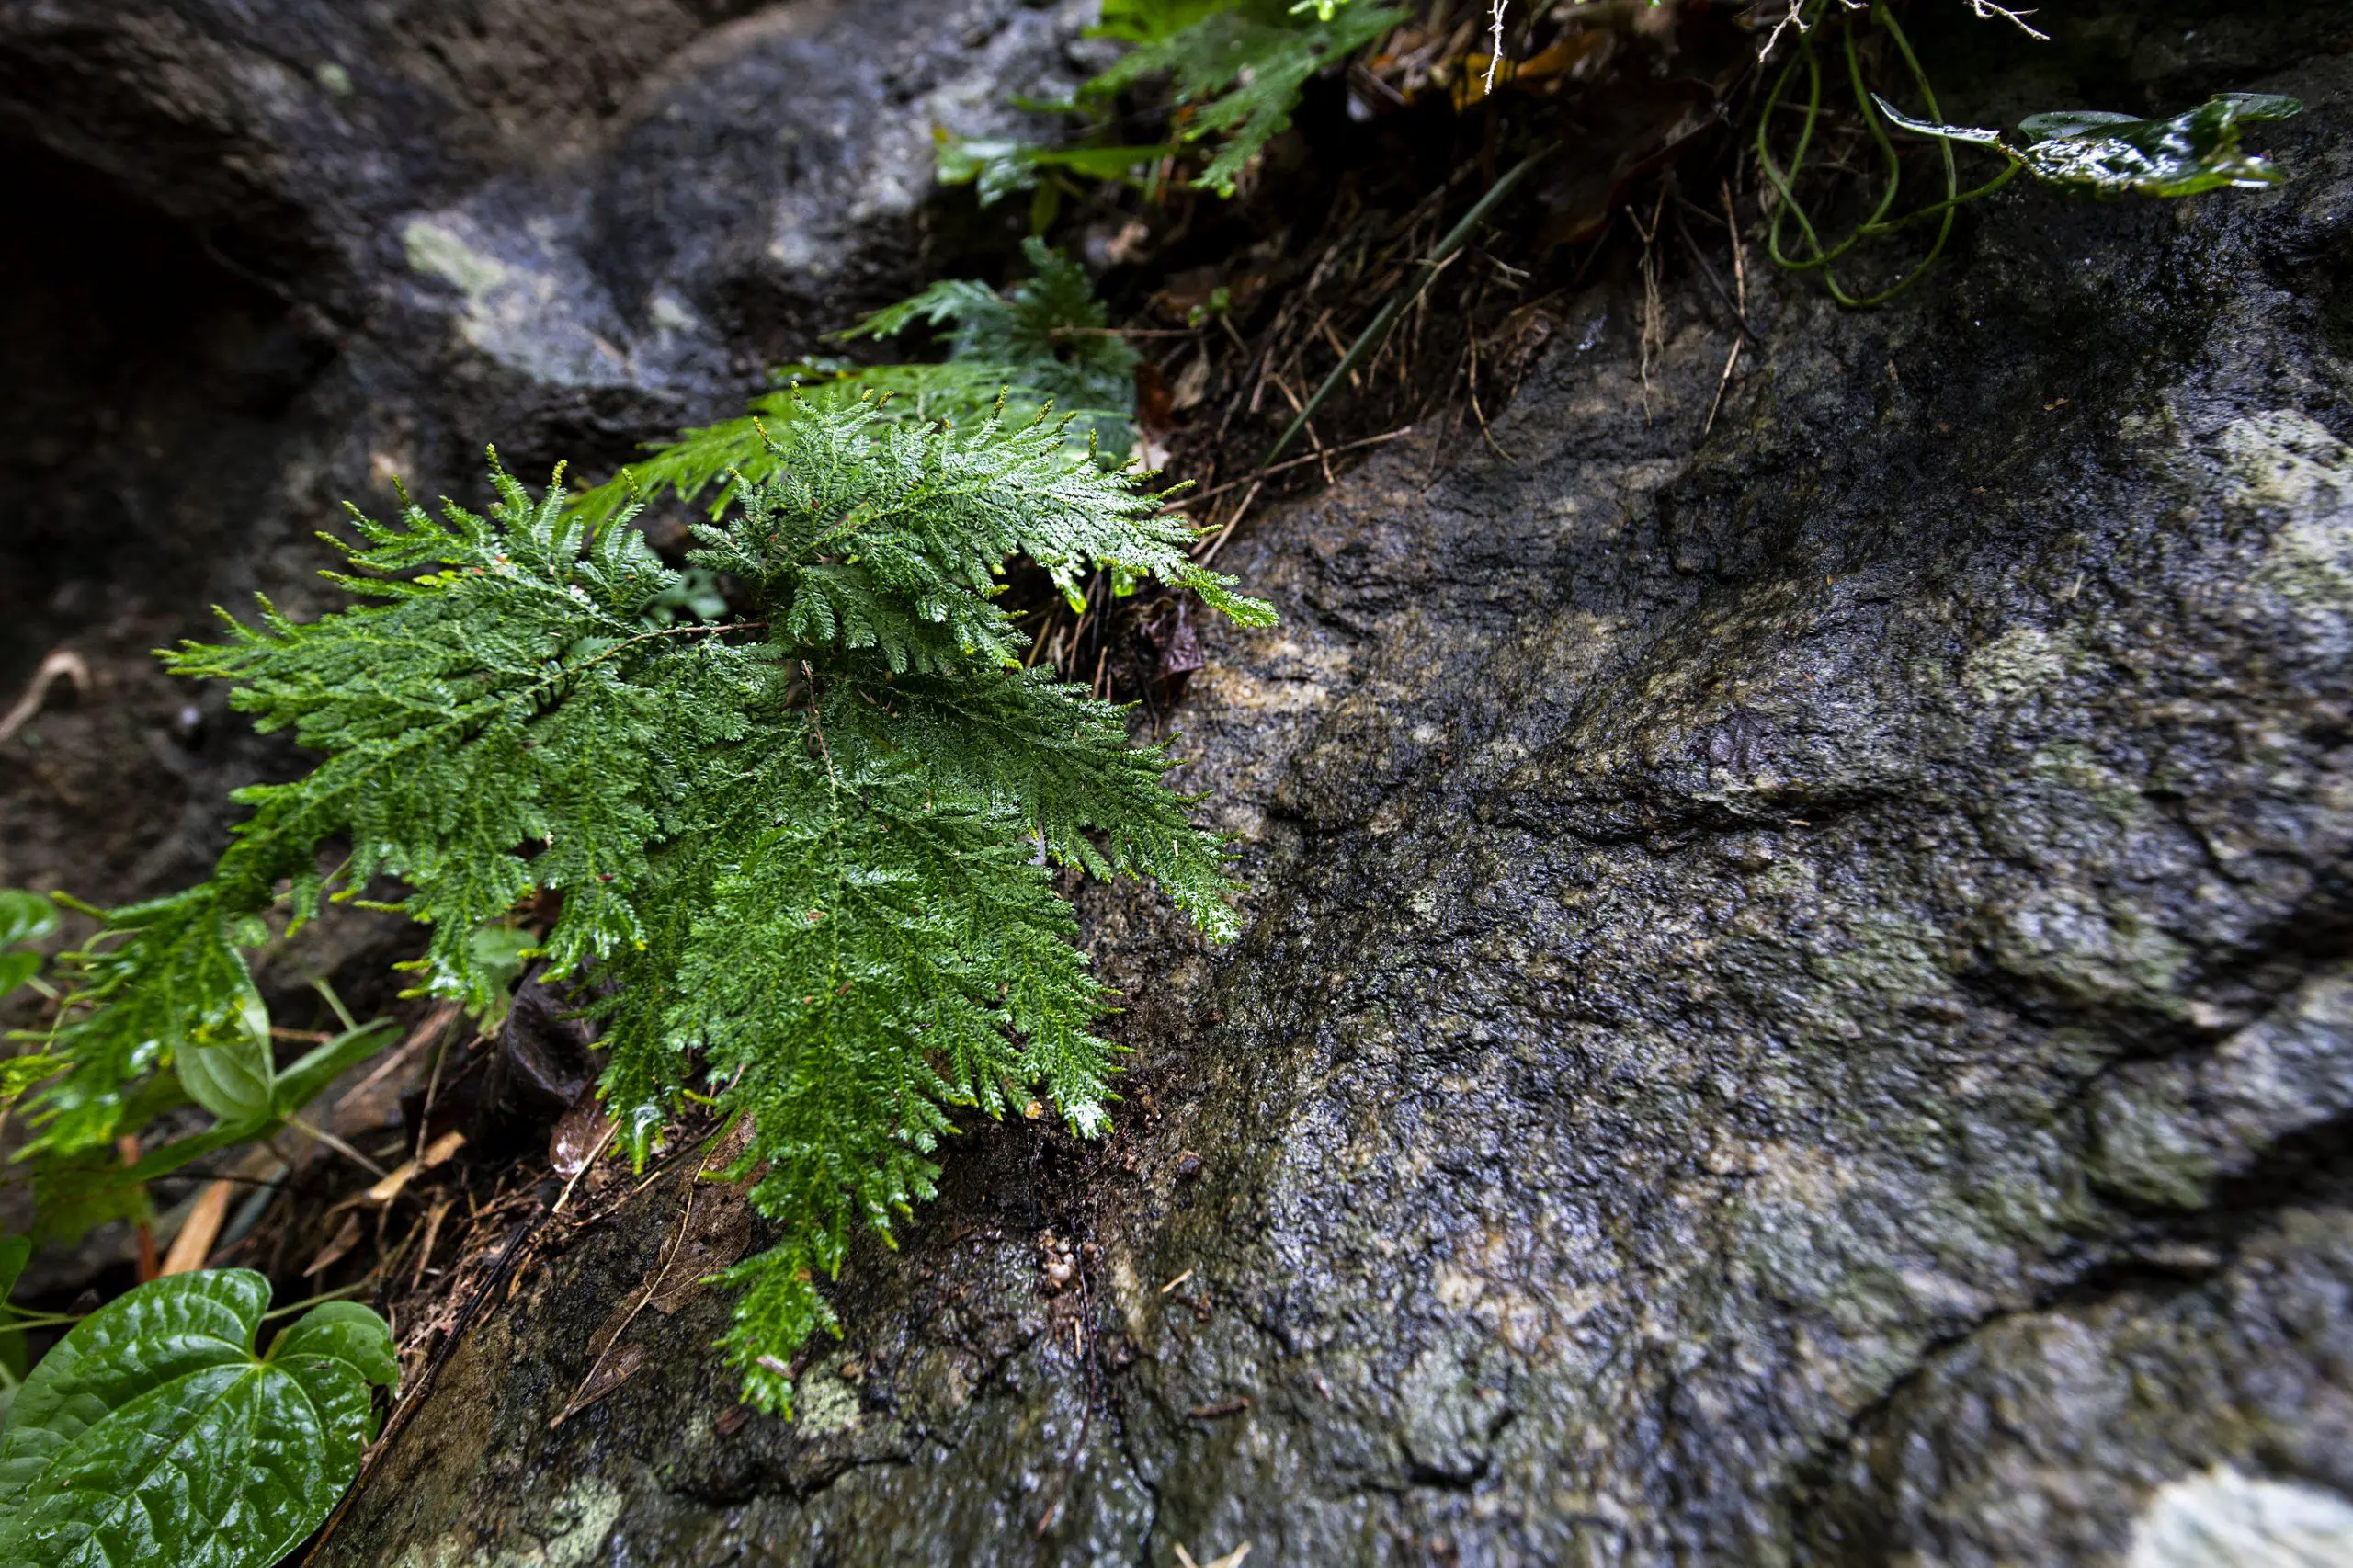 A scenery view of small plants of ferns and mosses grown on rocks and soil